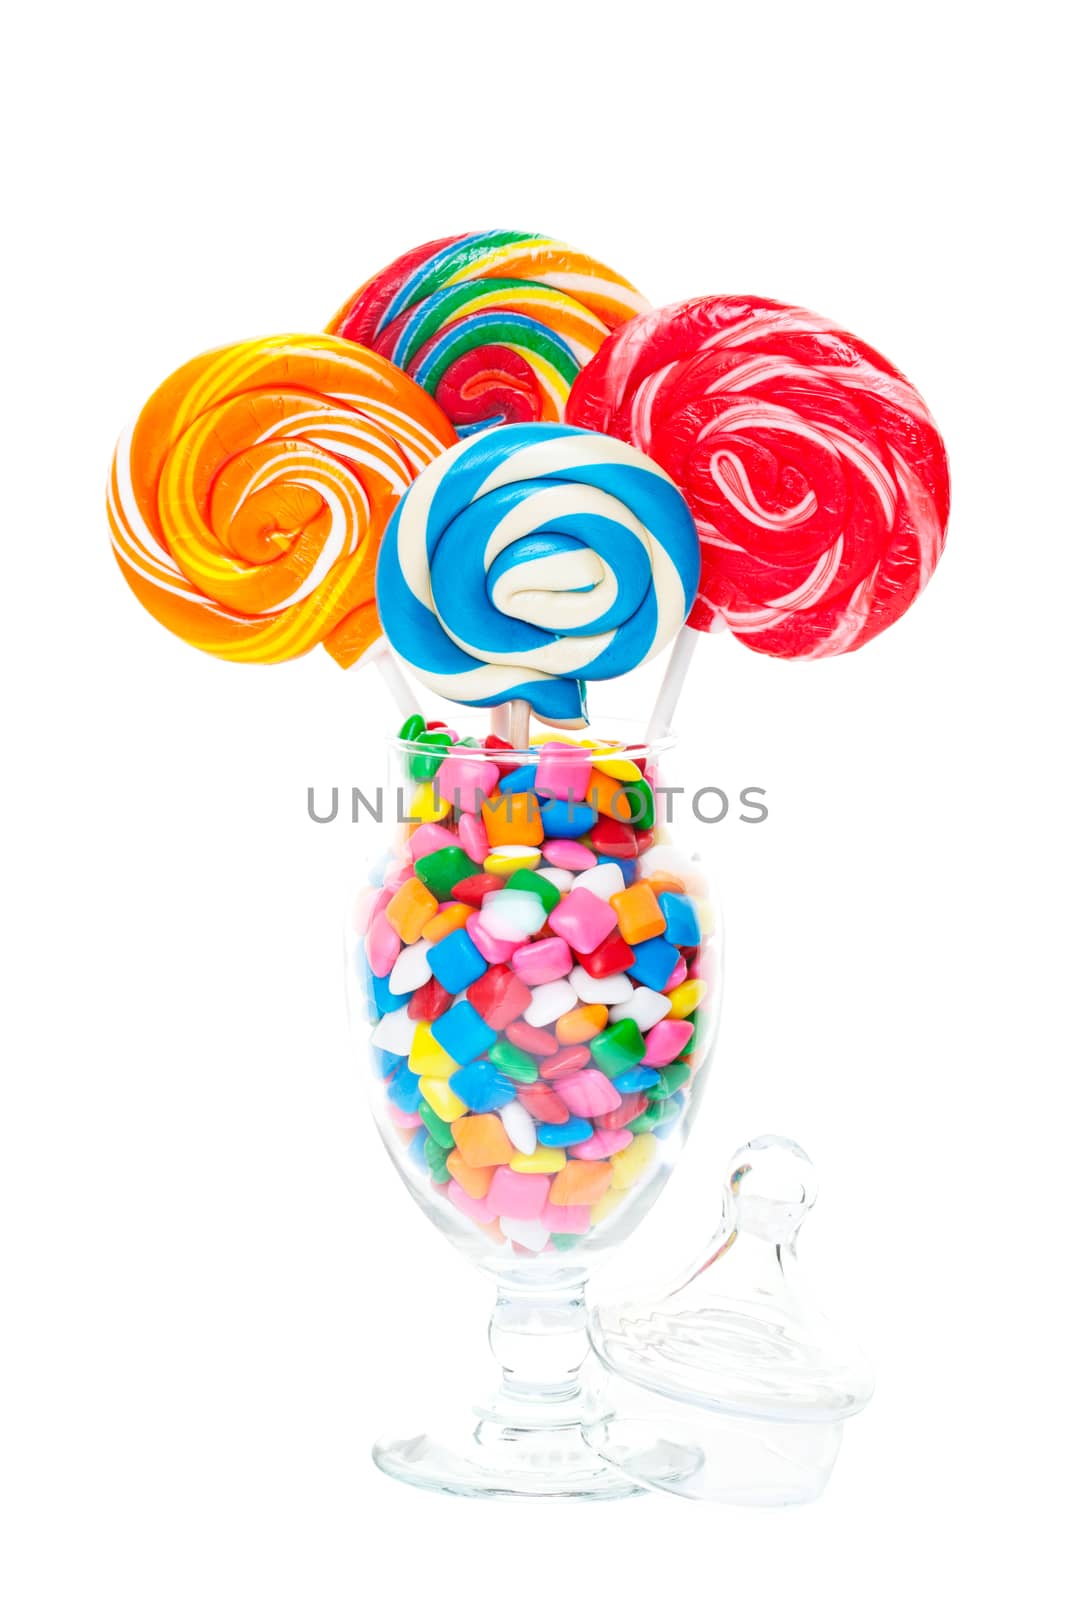 Large swirled lollipops displayed in an apothecary jar full of bubble gum.  Shot on white background.